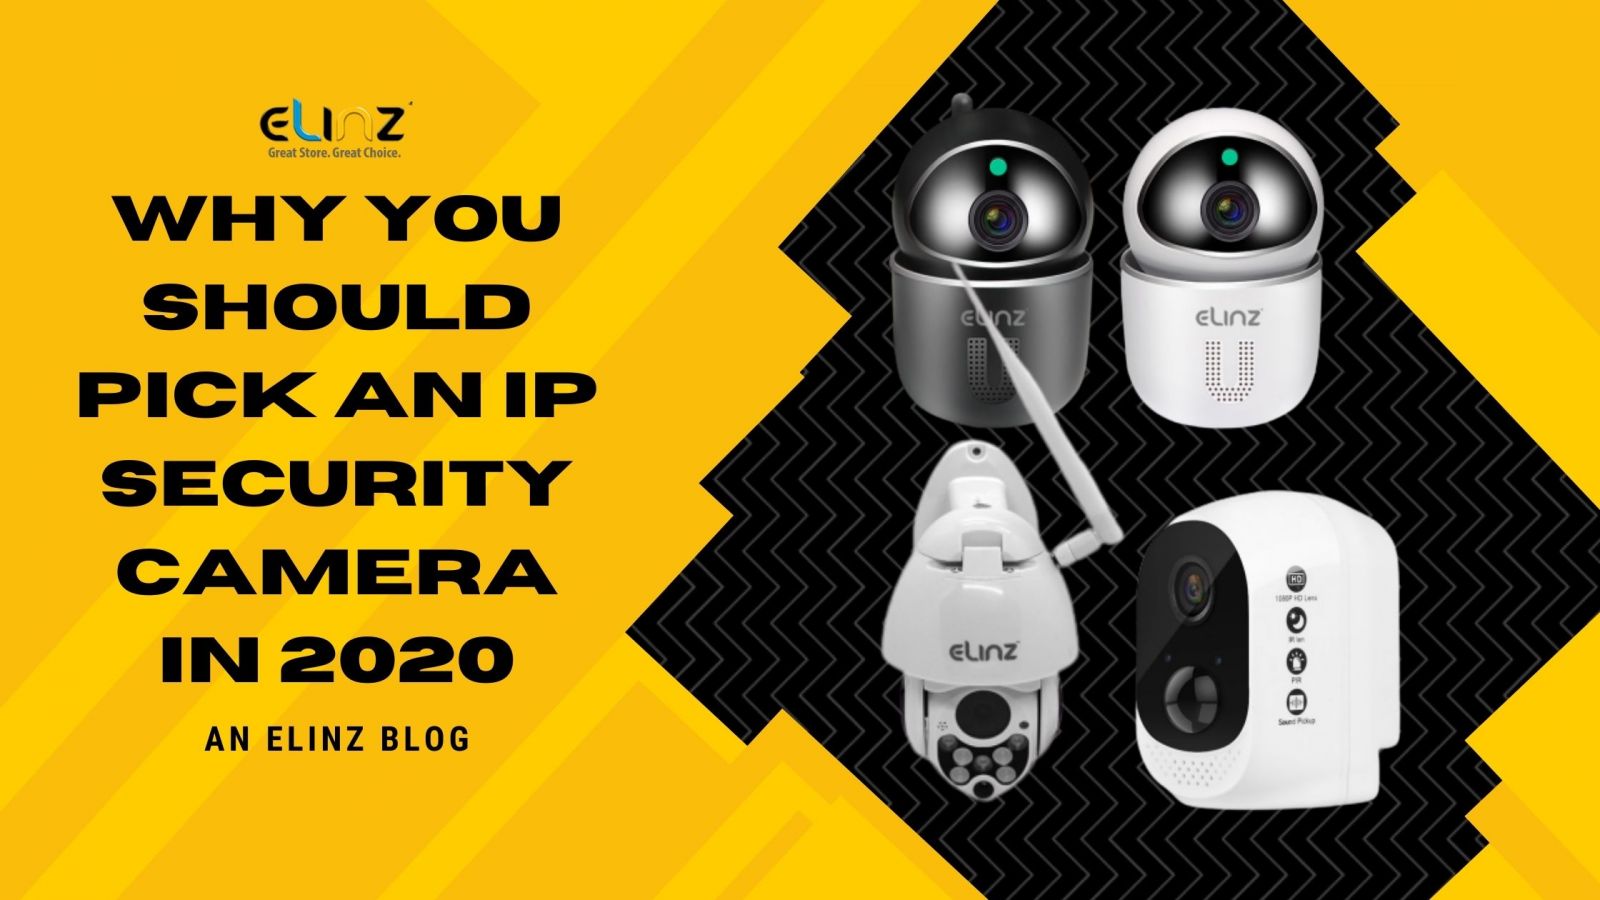 Why You Should Pick An IP Security Camera in 2020 graphic